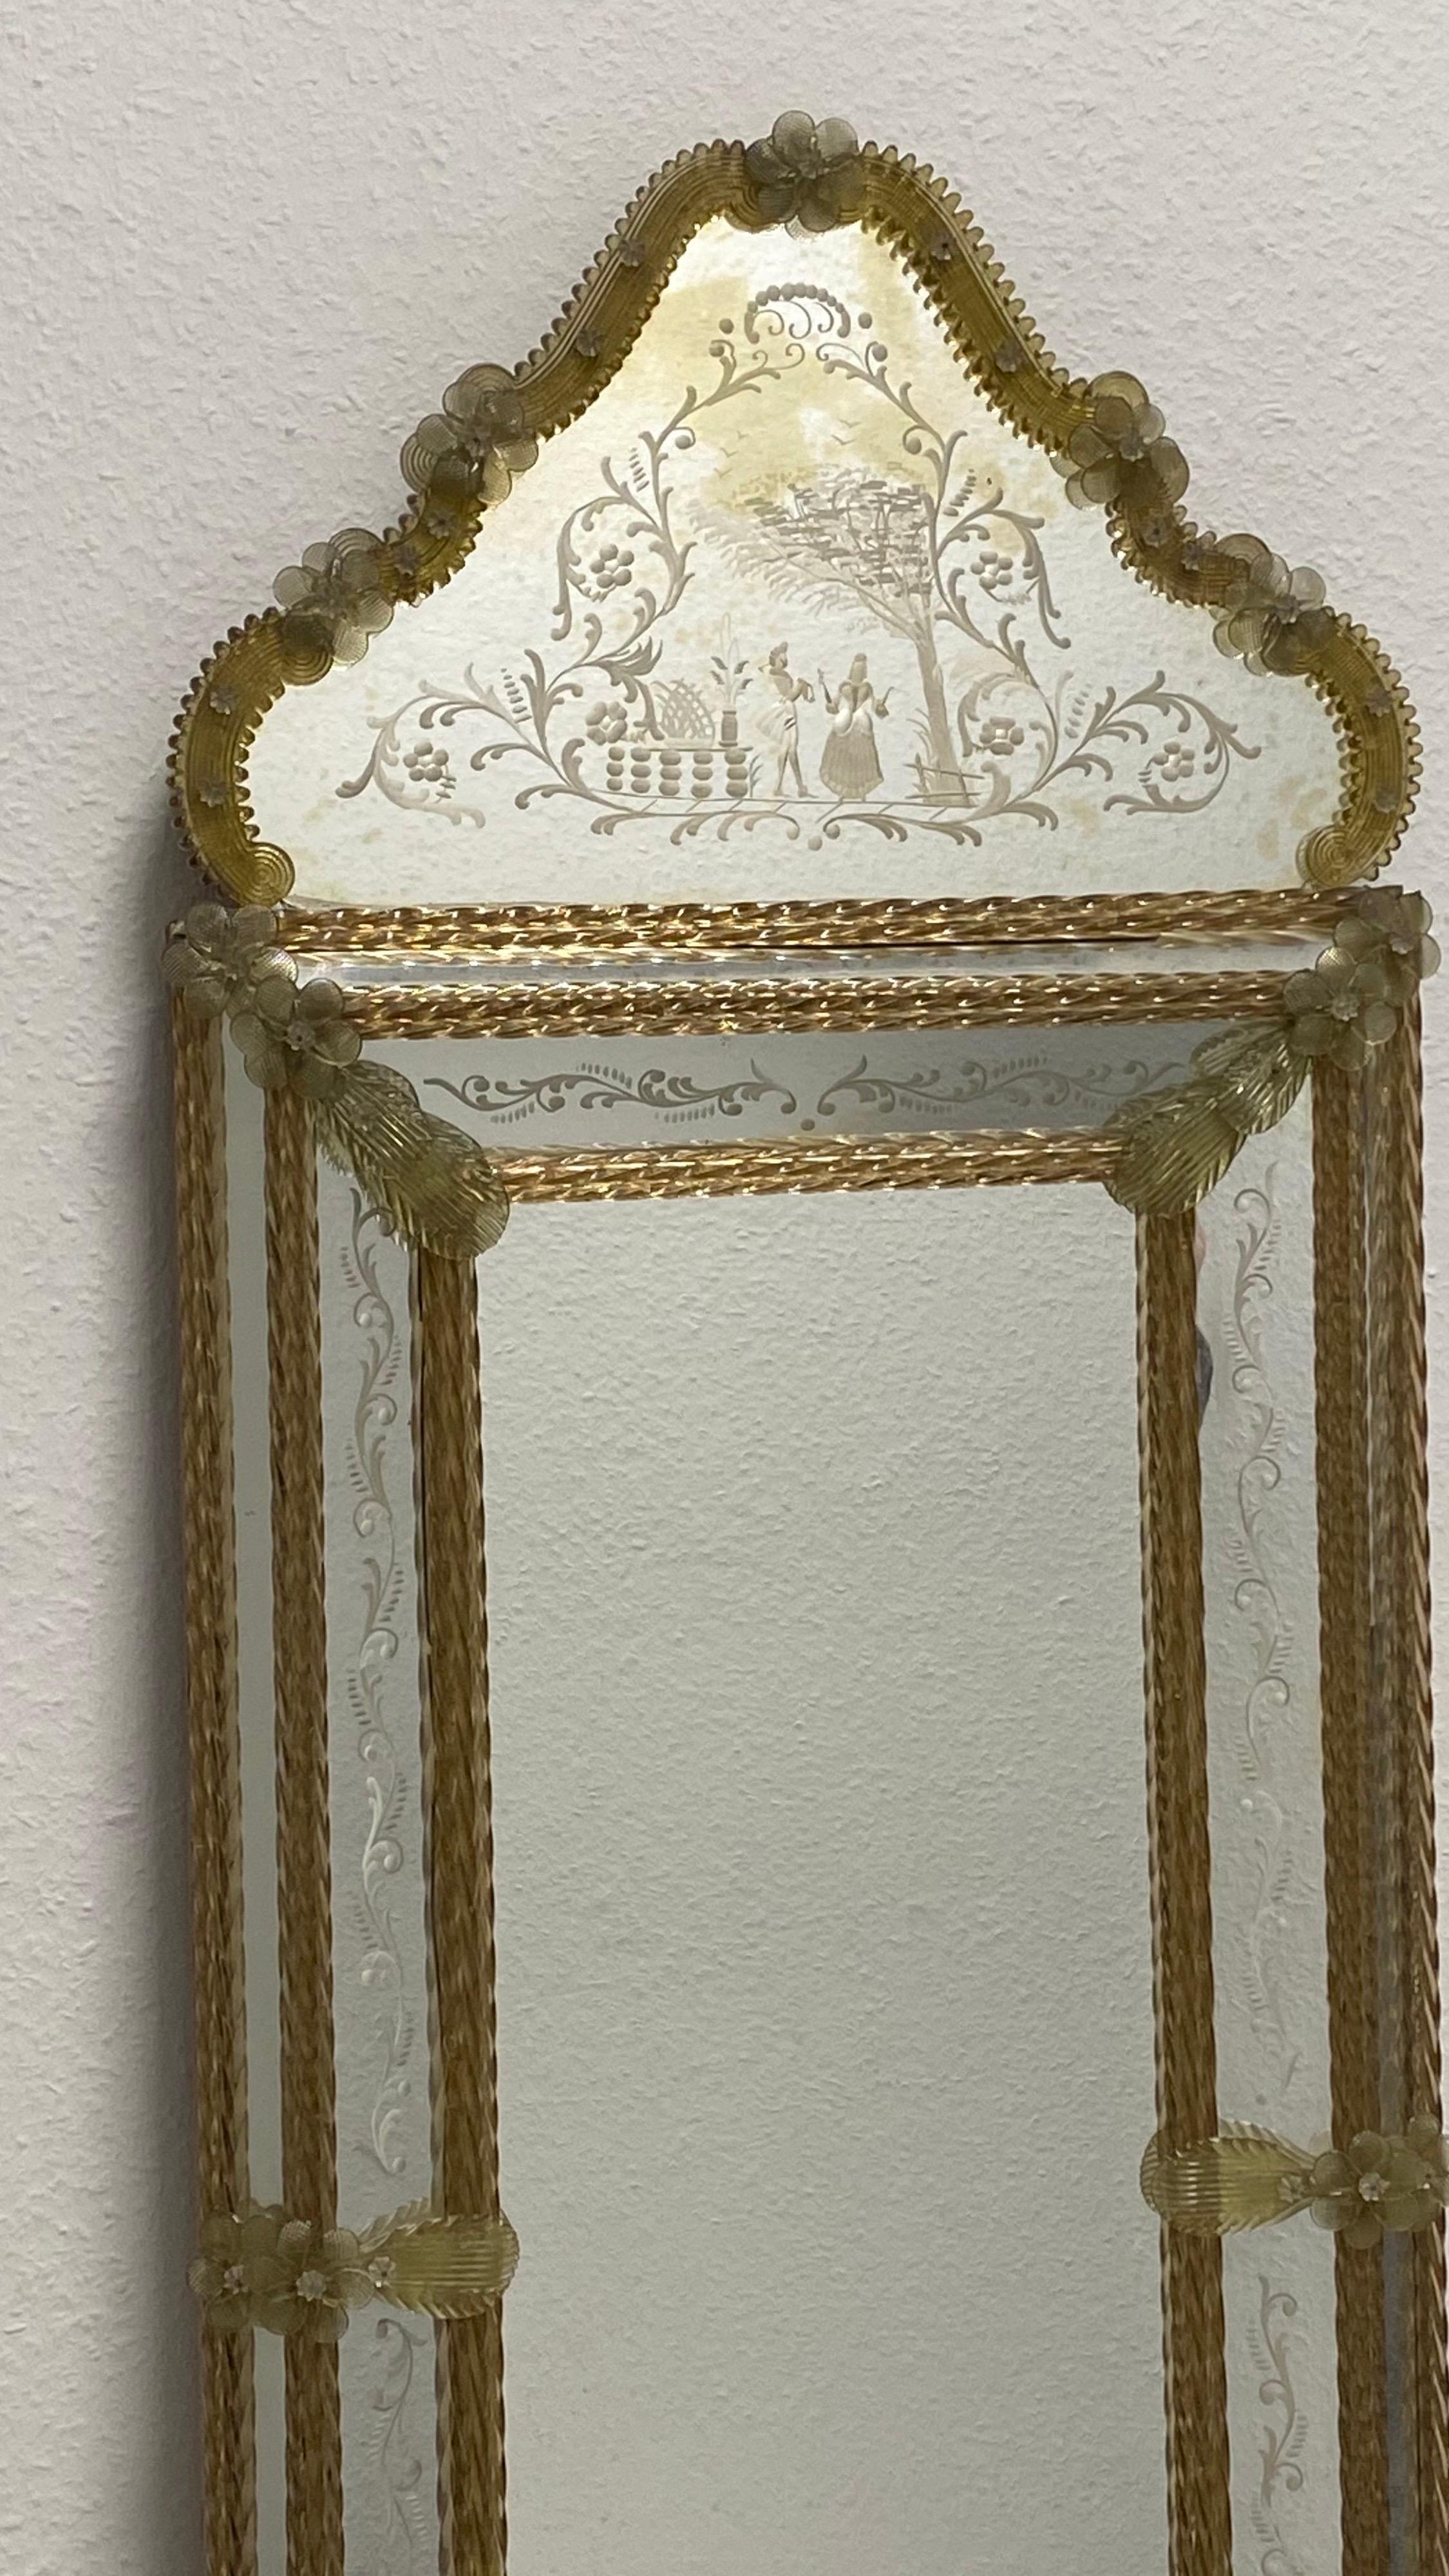 A stunning large Murano glass mirror surrounded with handmade gold flake glass flowers. Age approx. 1950s or older. A view small little distressed or blind spots in the mirror but this is old-age. With signs of wear as expected with age and use.